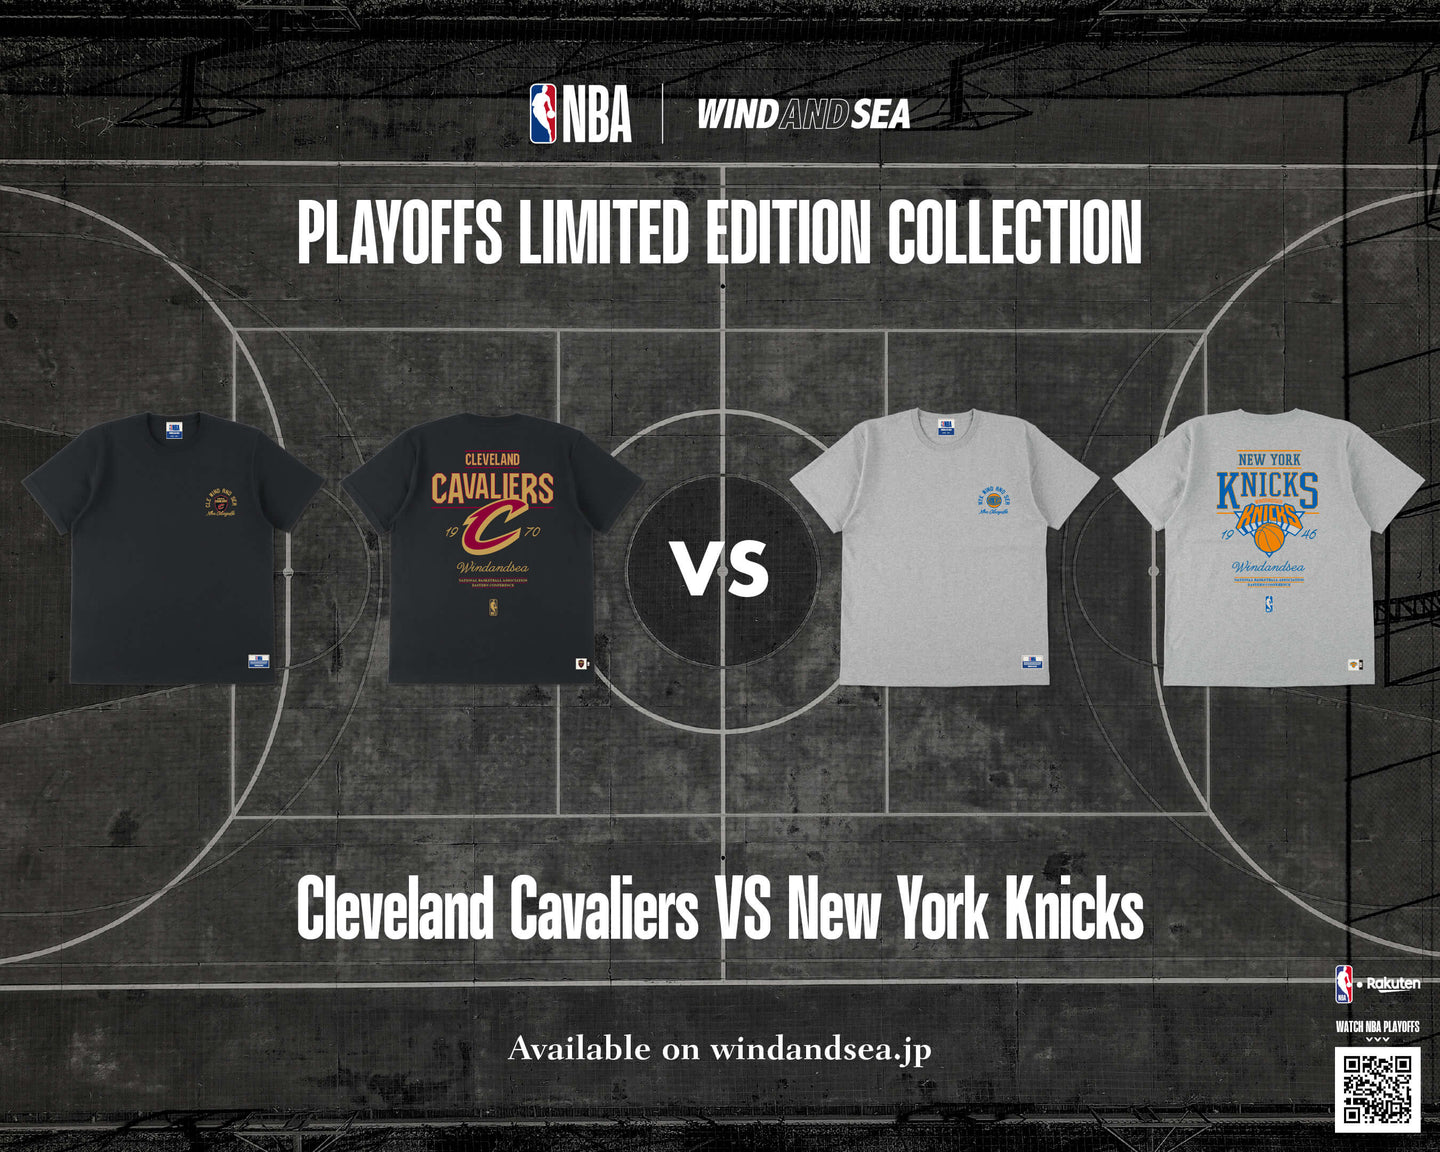 03NBA23PLAYOFFS-EAST-1st-CLE_NYK